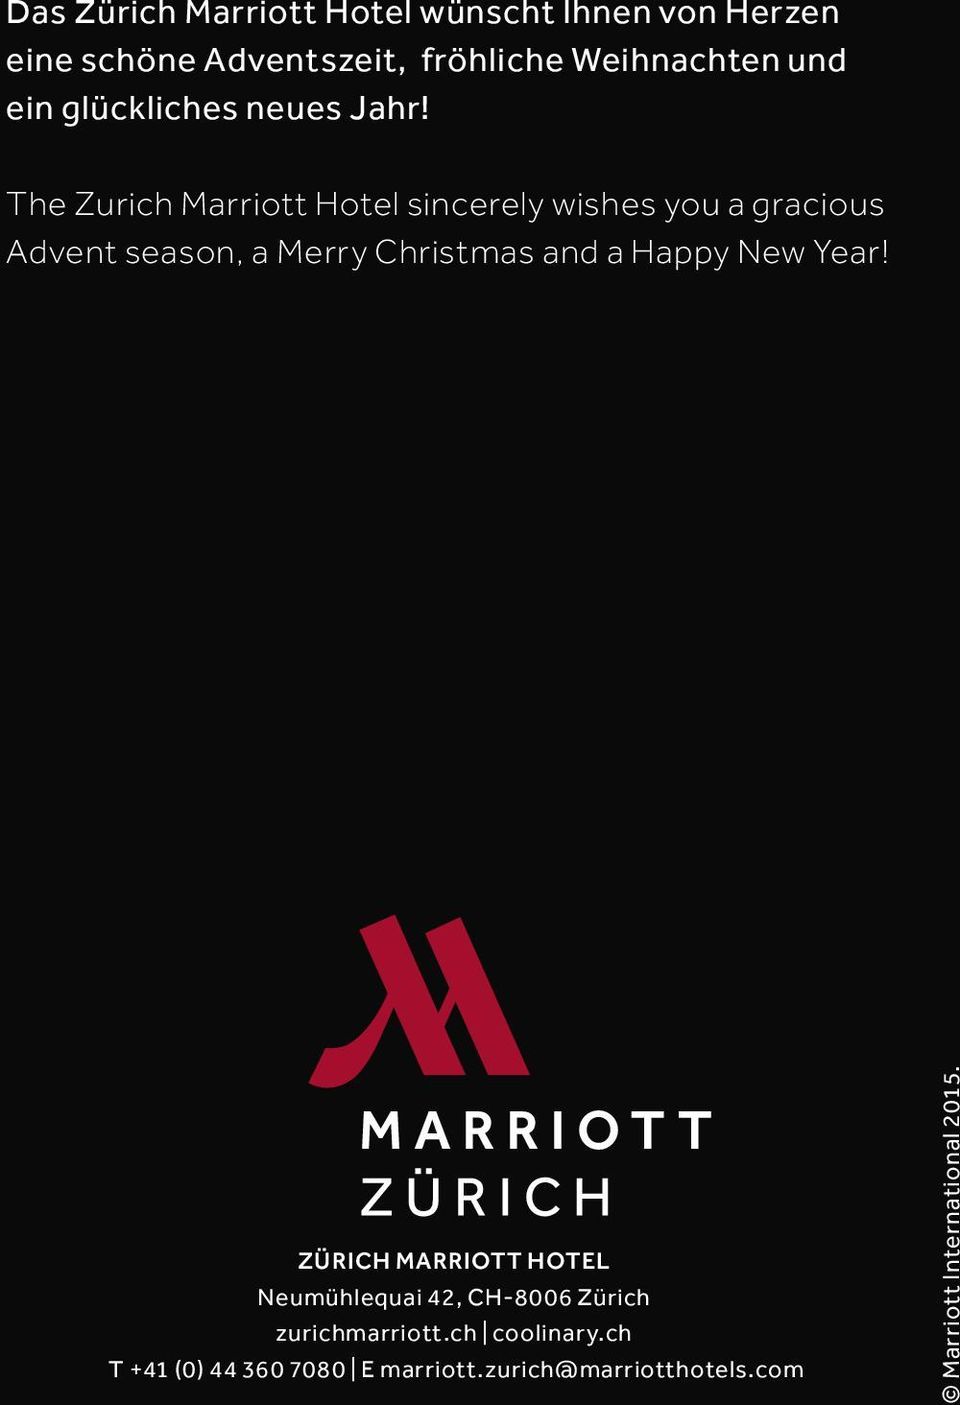 The Zurich Marriott Hotel sincerely wishes you a gracious Advent season, a Merry Christmas and a Happy